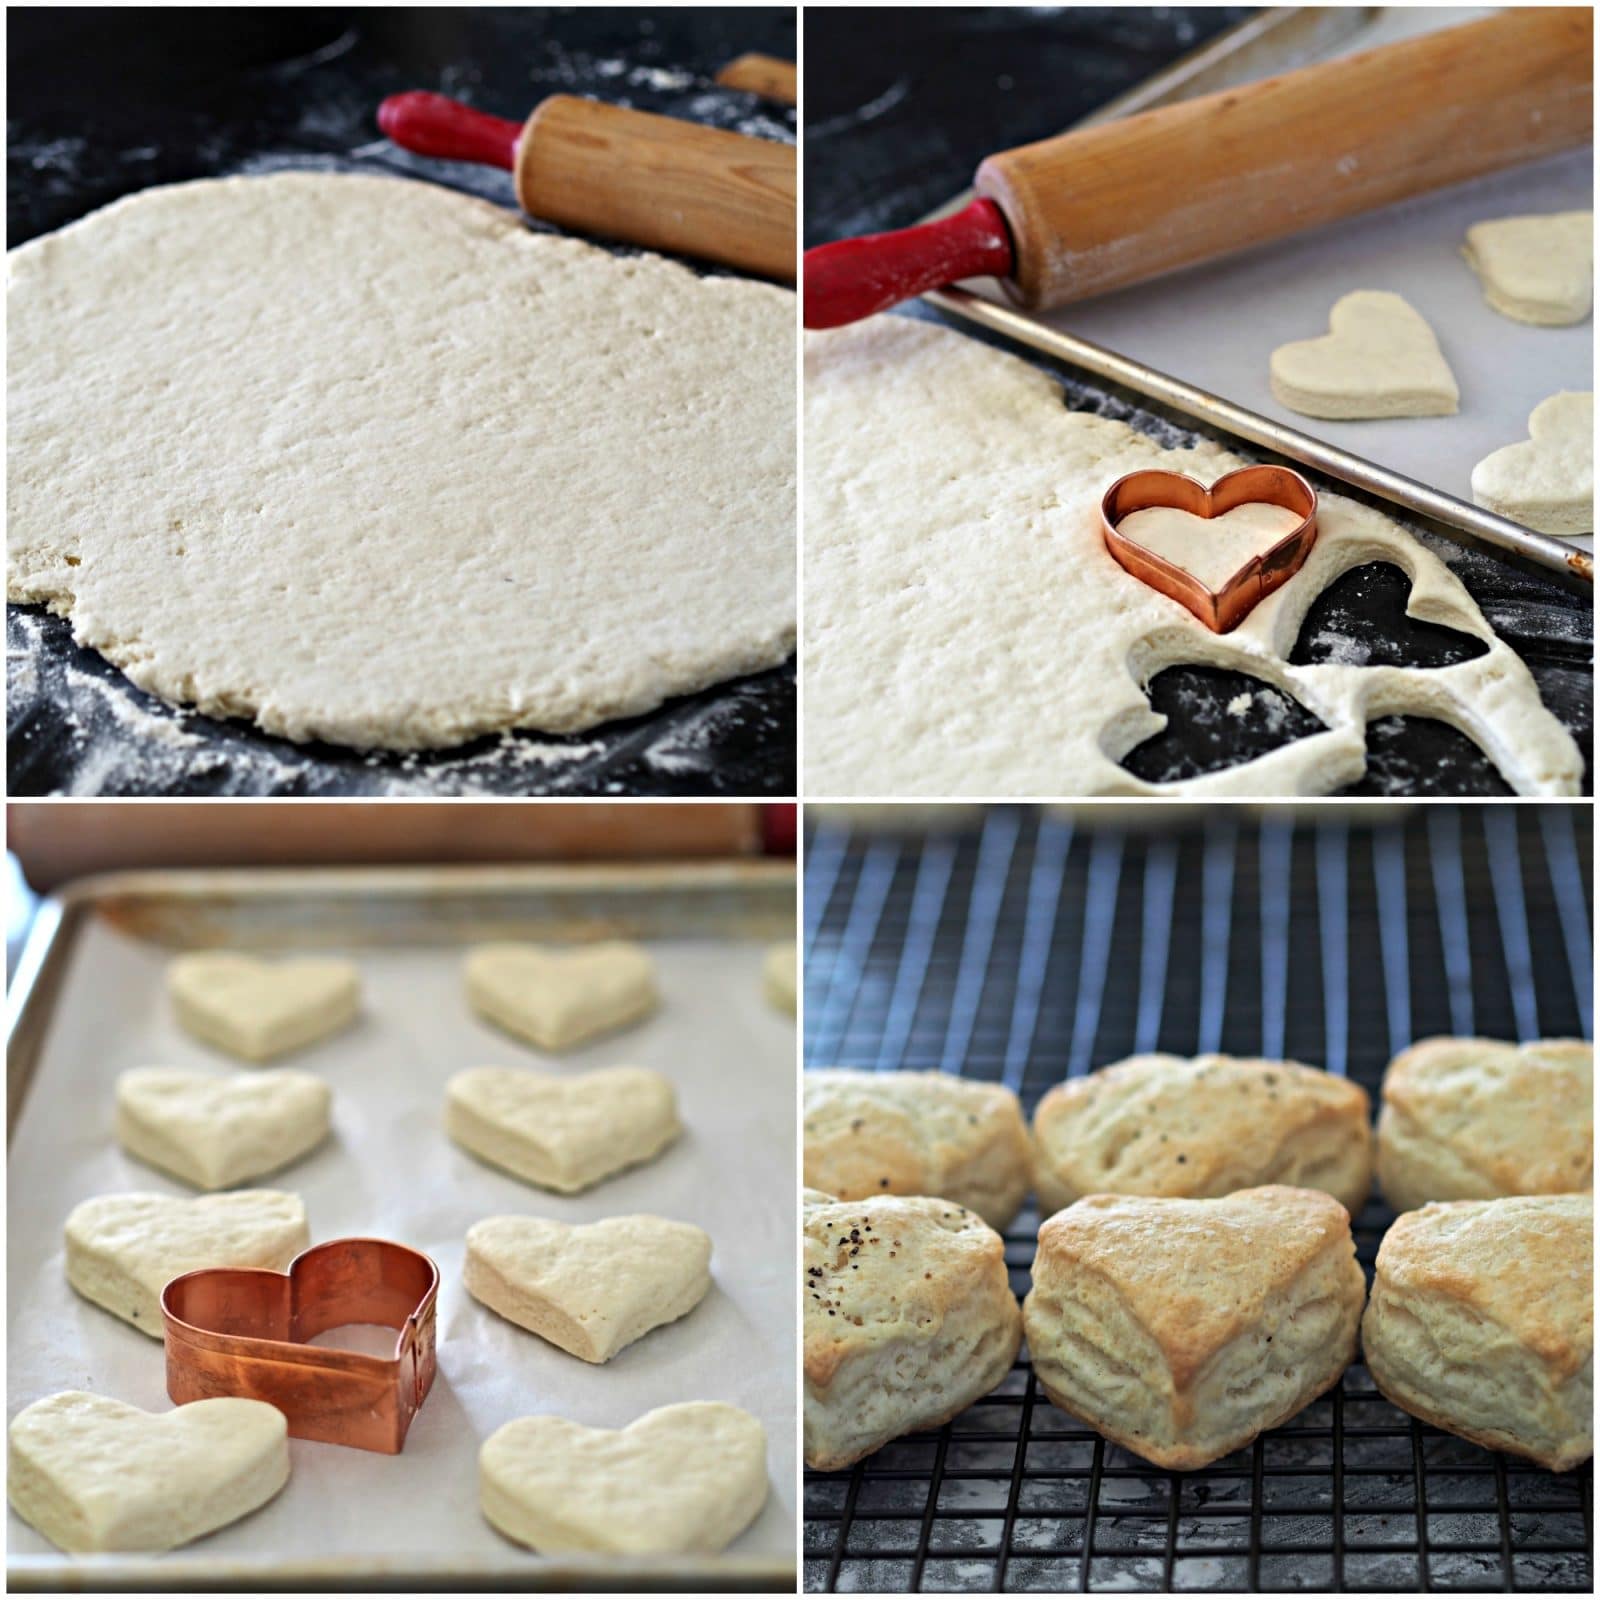 Old-Fashioned Biscuits made with White Lily, Self-Rising Flour are the perfect biscuit. Light and flavorful with a slightly crispy exterior. Simply Sated